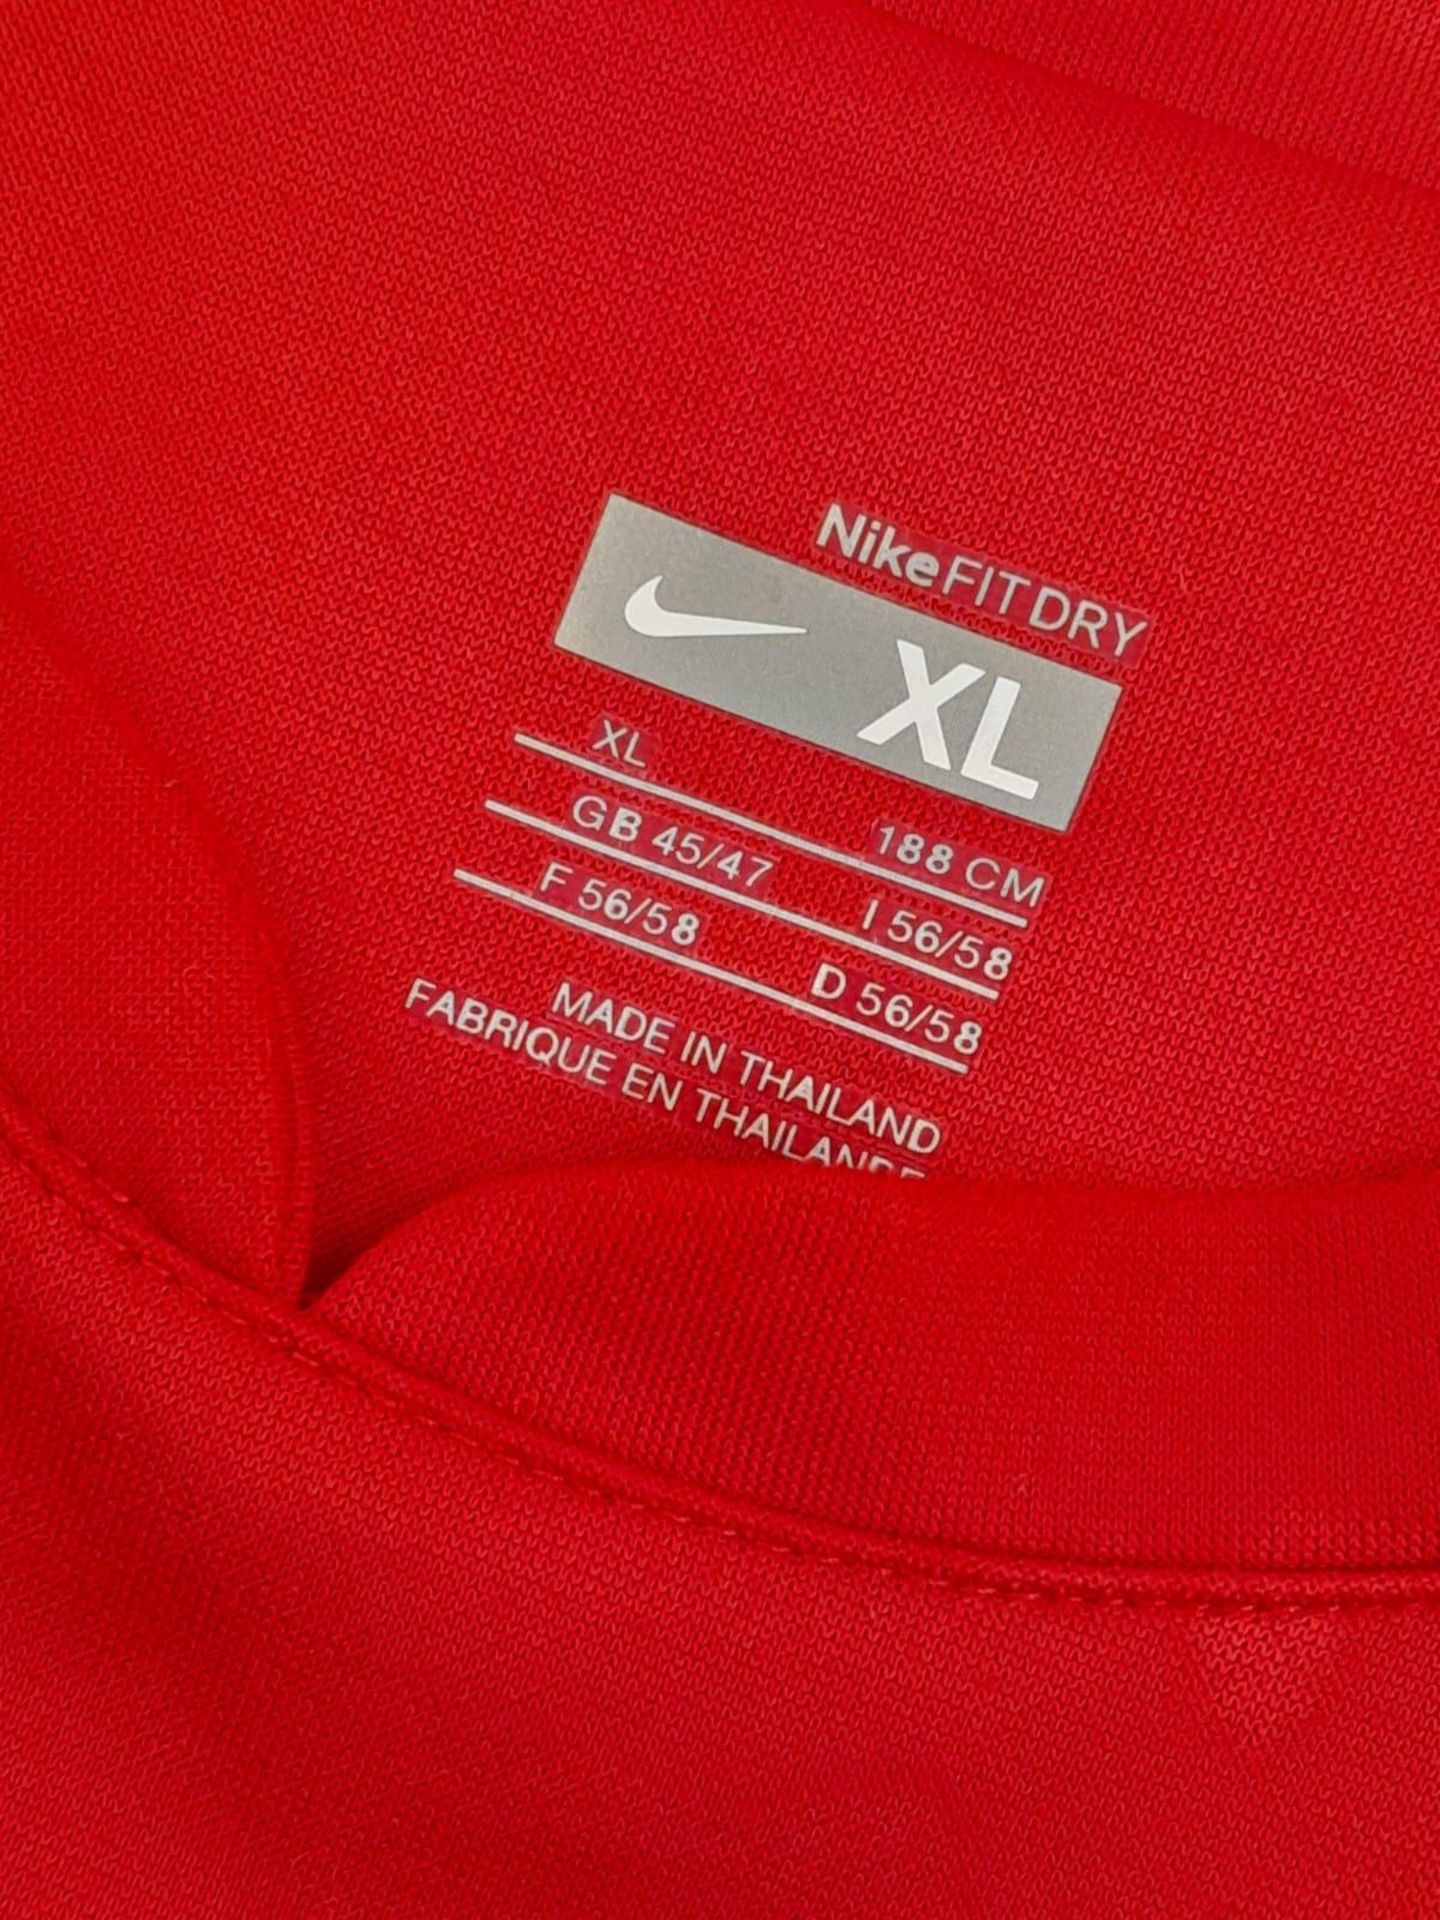 A Collection of Manchester United Clothing: Nike Red Shirt - AIG (XL), Scarf, Xmas Hat, Beenie hat - Image 4 of 6